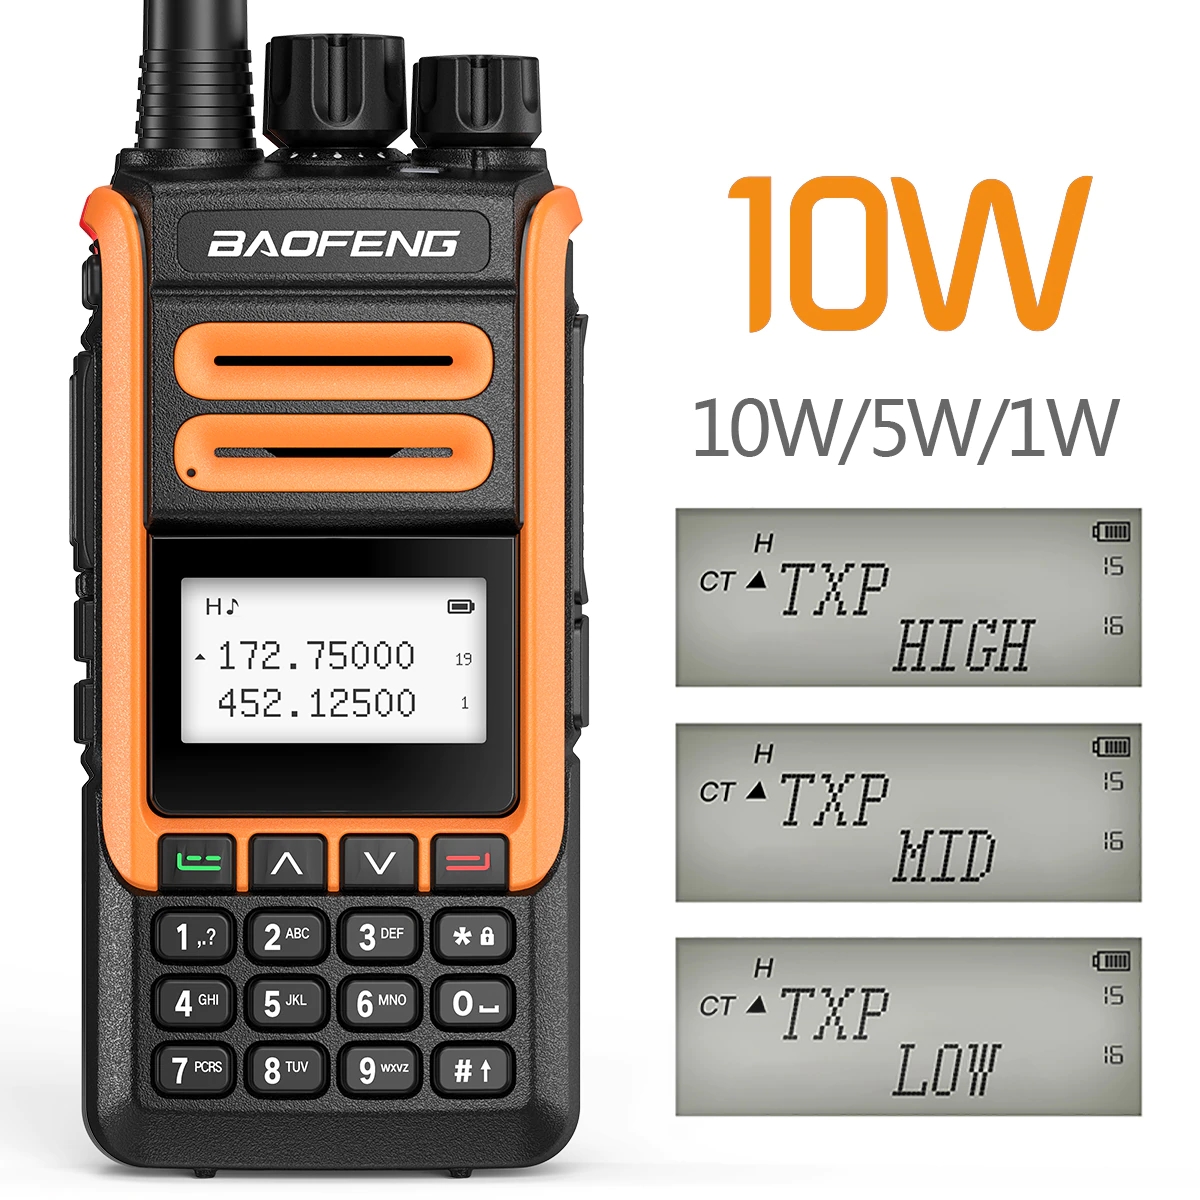 Baofeng UV-9R Model Comparison and Power Testing 